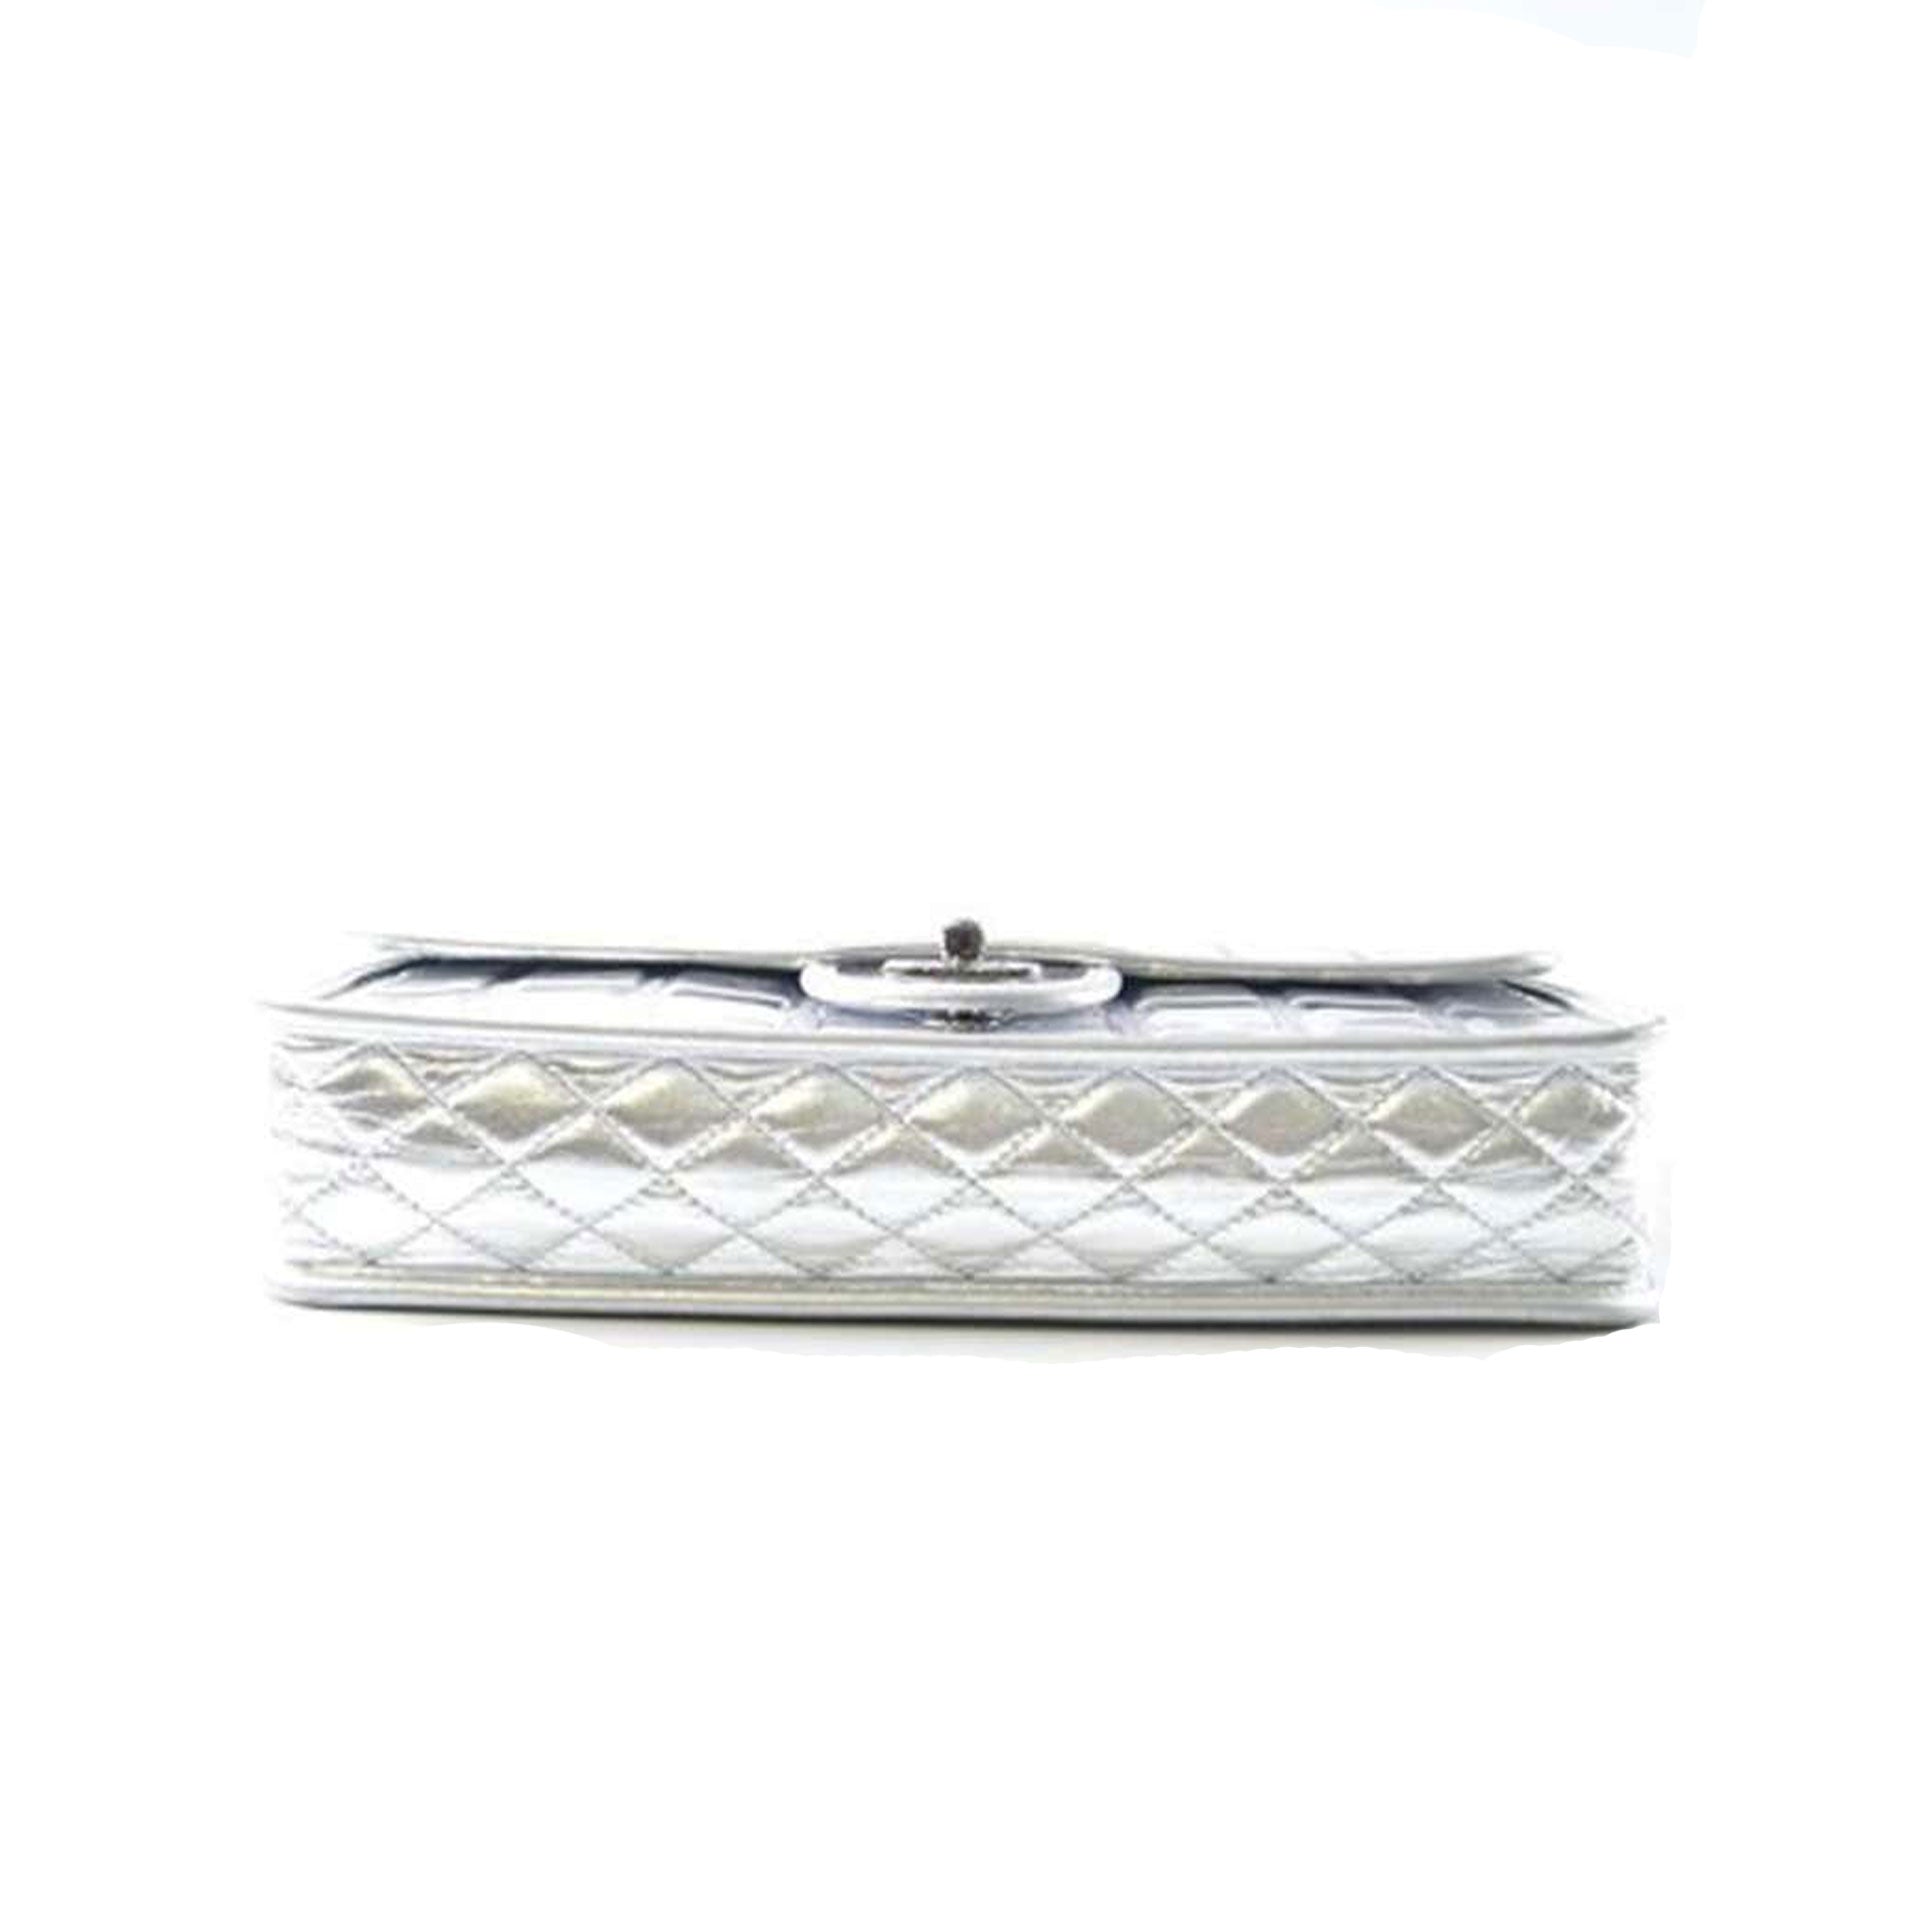 Chanel Ice Cube Flap Metallic Silver Leather Shoulder Bag